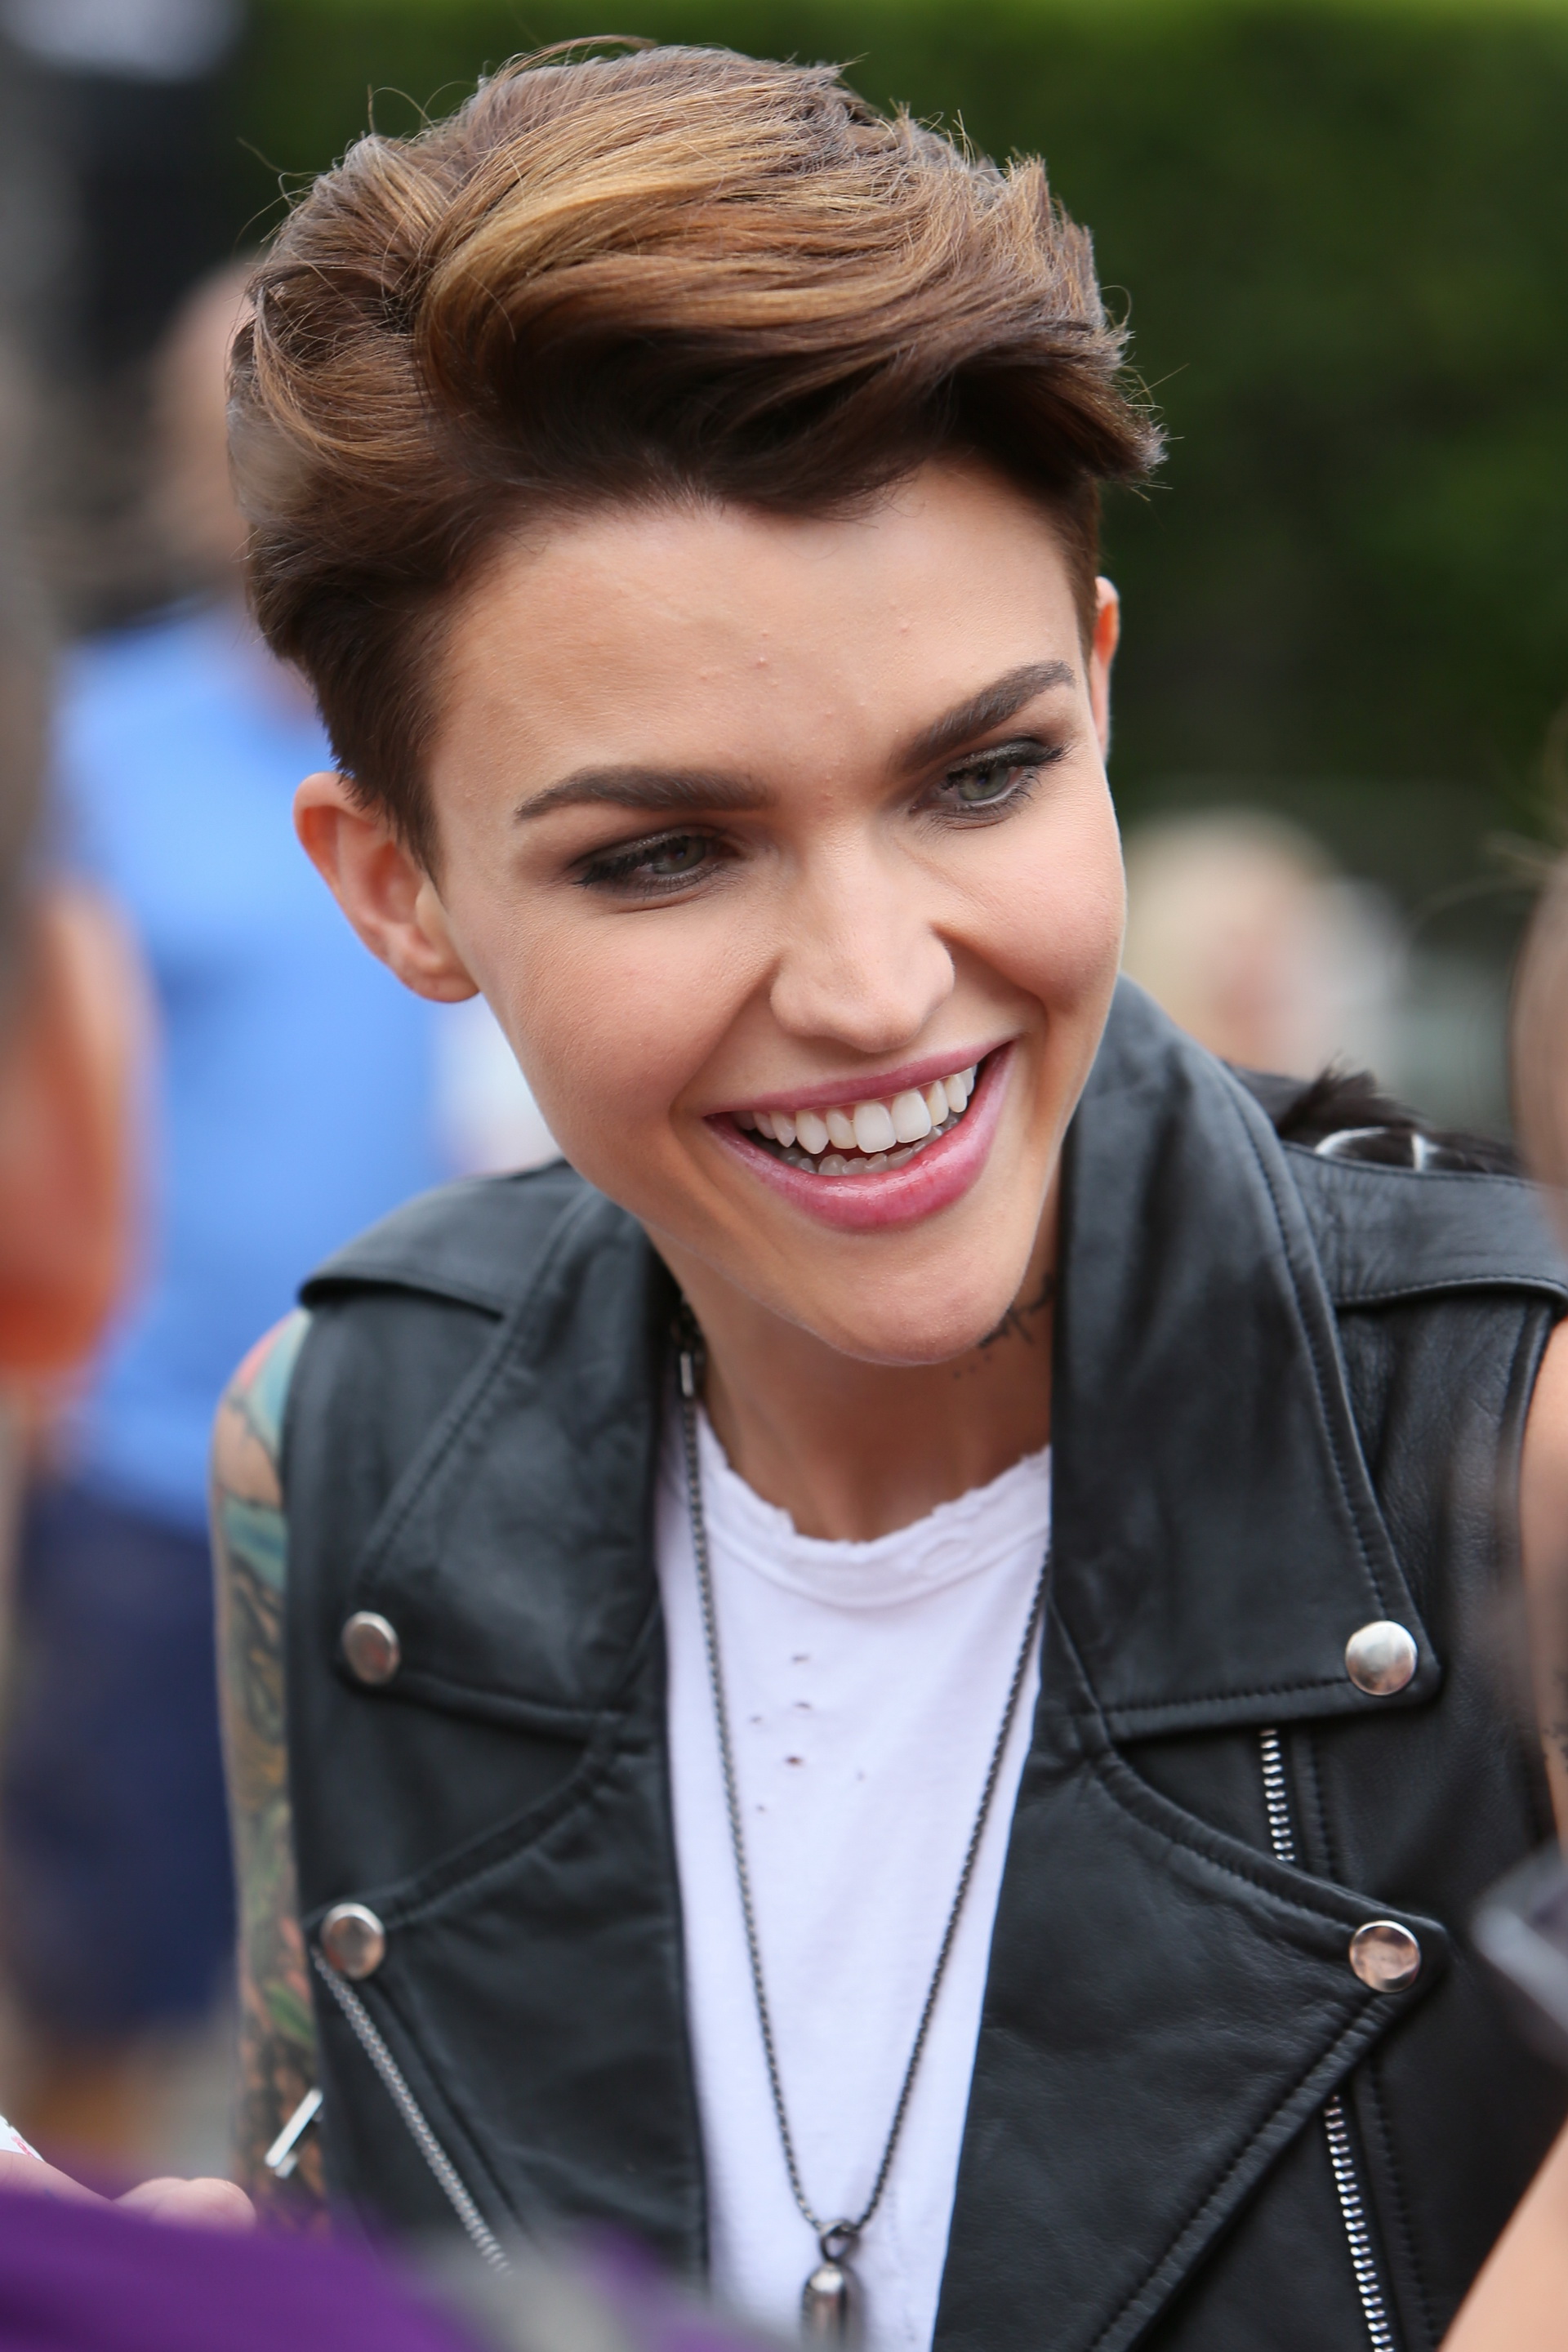 Ruby rose long hair – fashion inspiration for most women 